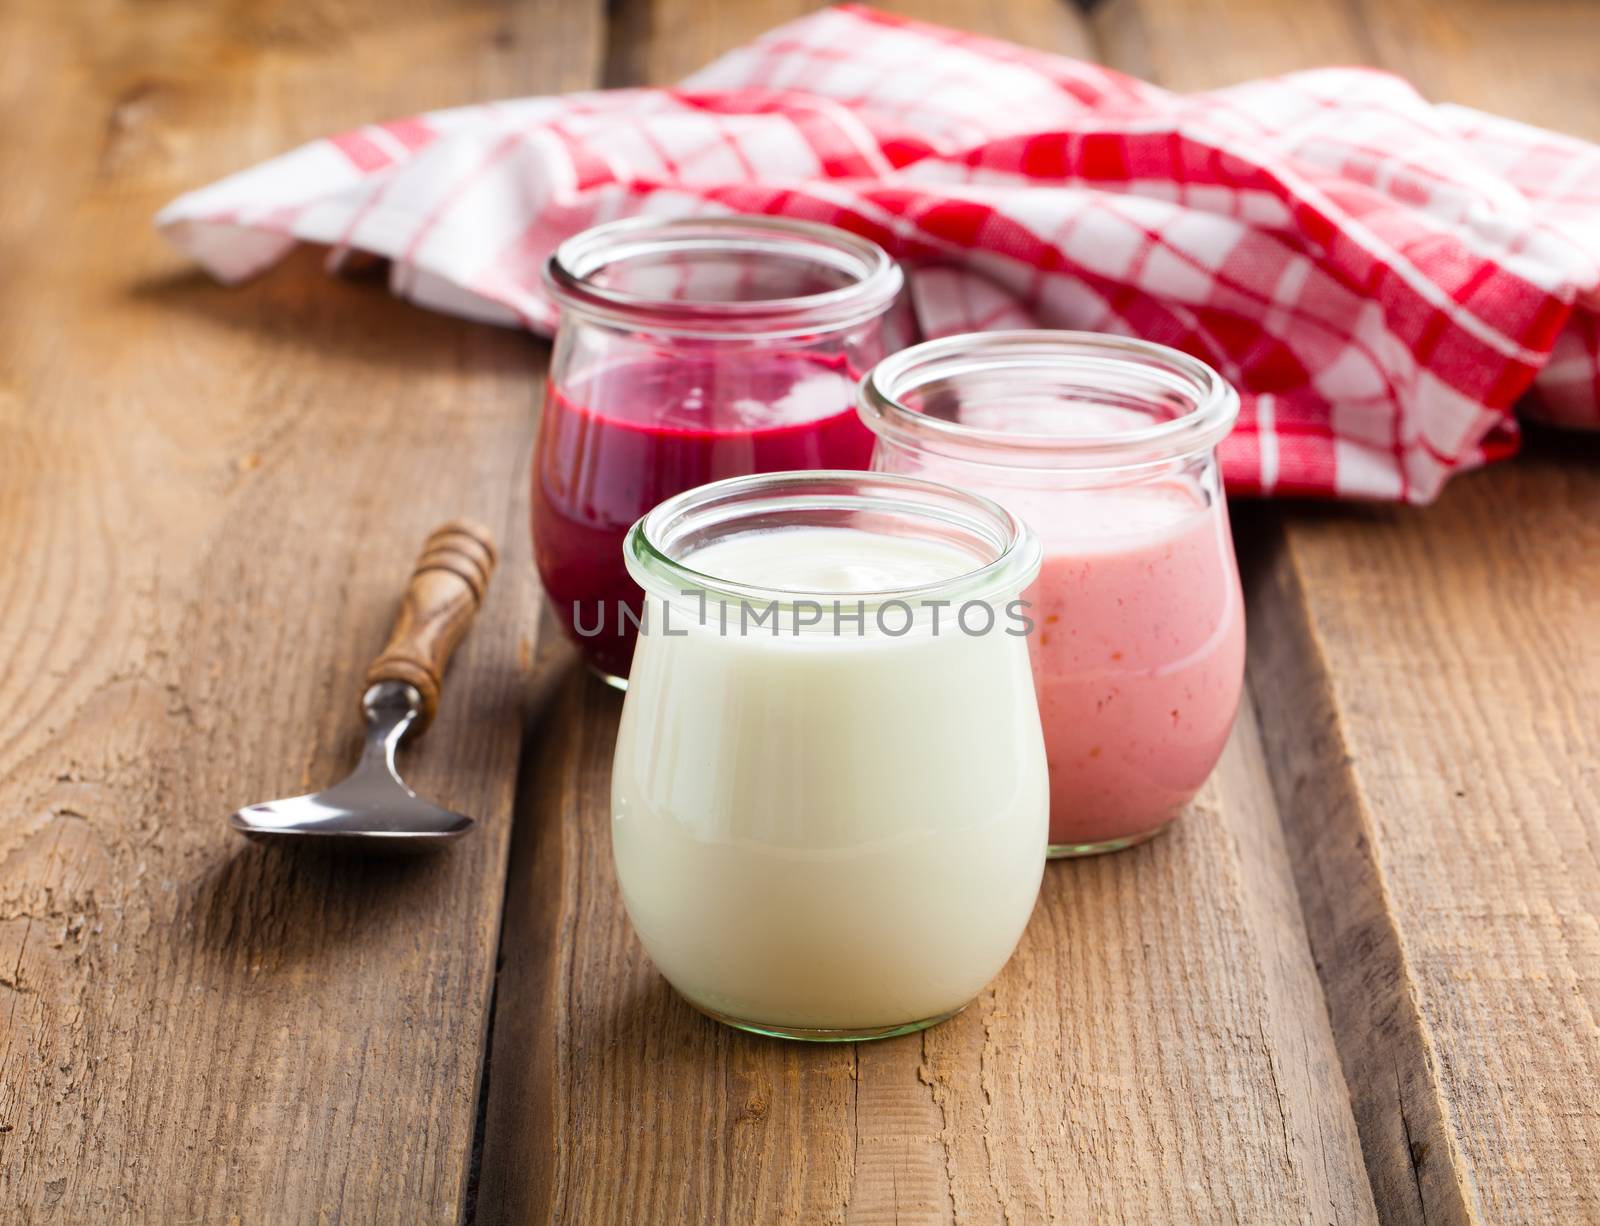 Healthy yougurt in a glass jars on wooden background by motorolka